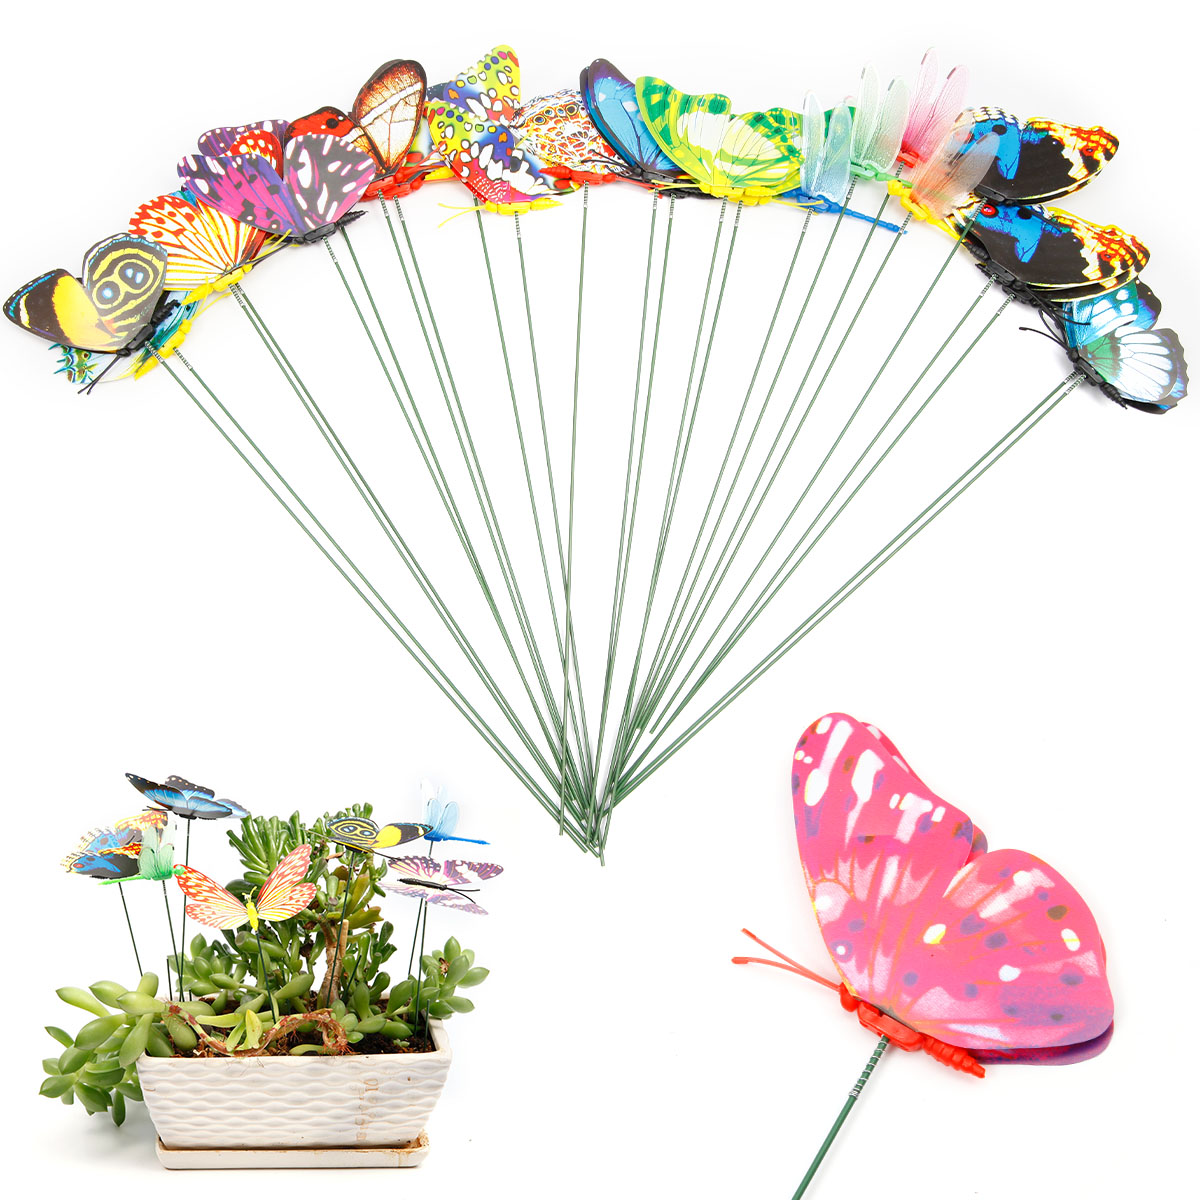 24 SurePromise 20pcs Garden Butterflies Stakes and 4pcs Dragonflies Stakes Garden Luminous Ornaments for Yard Patio Party Decorations